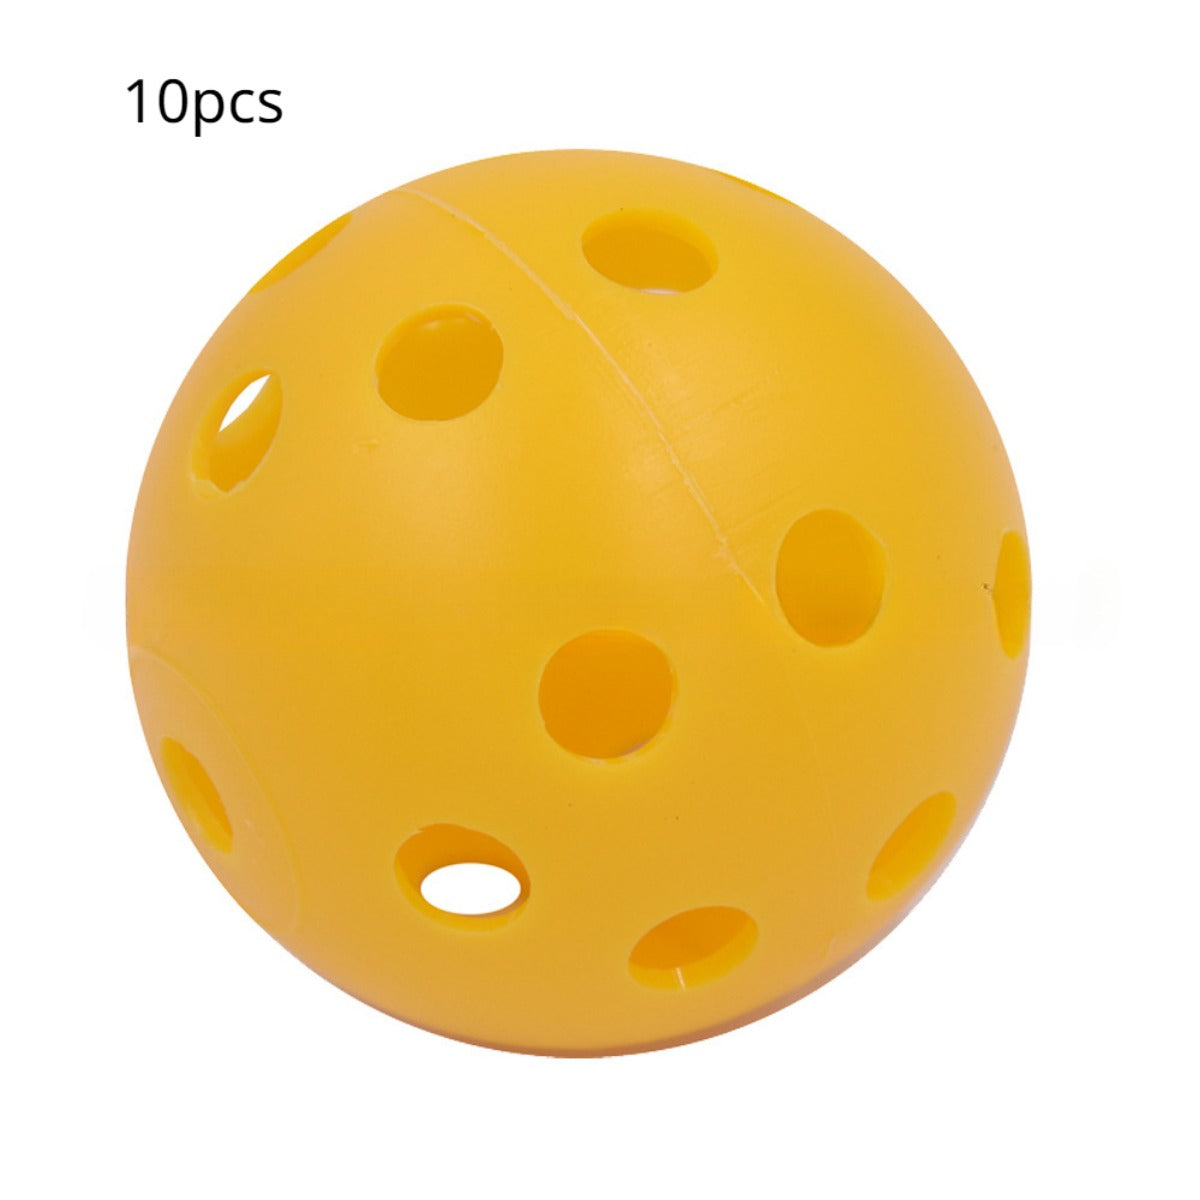 10 Hollow and soft plastic practice balls